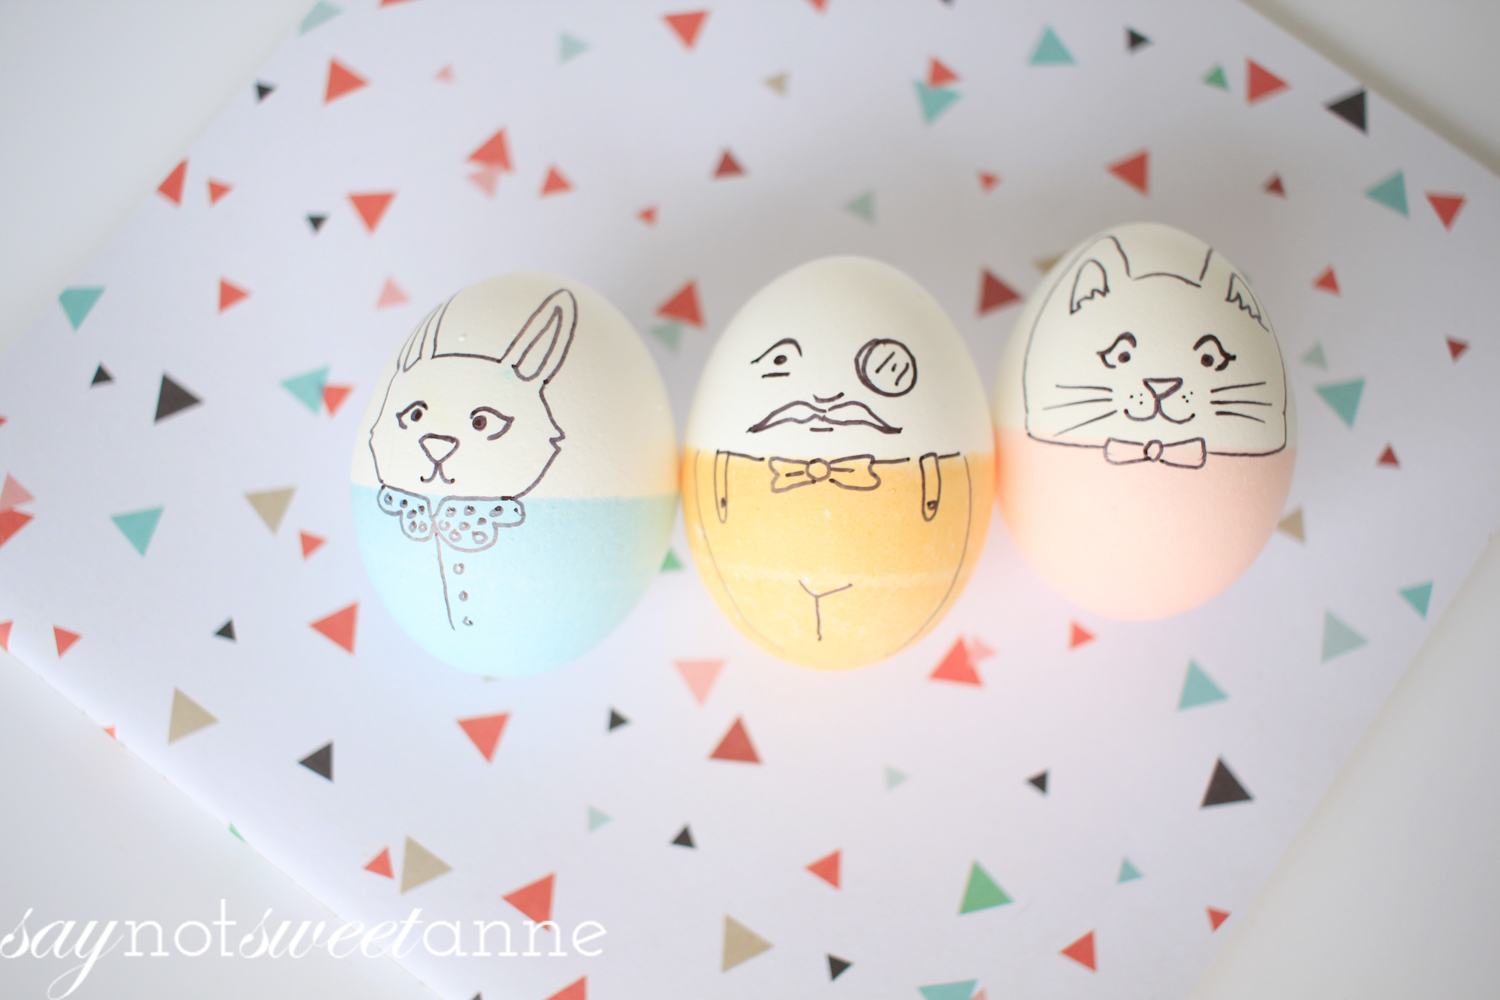 How To Make Absolutely Adorable Character Easter Eggs. A simply dye job and some marker make these beautiful eggs! | saynotsweetanne.com